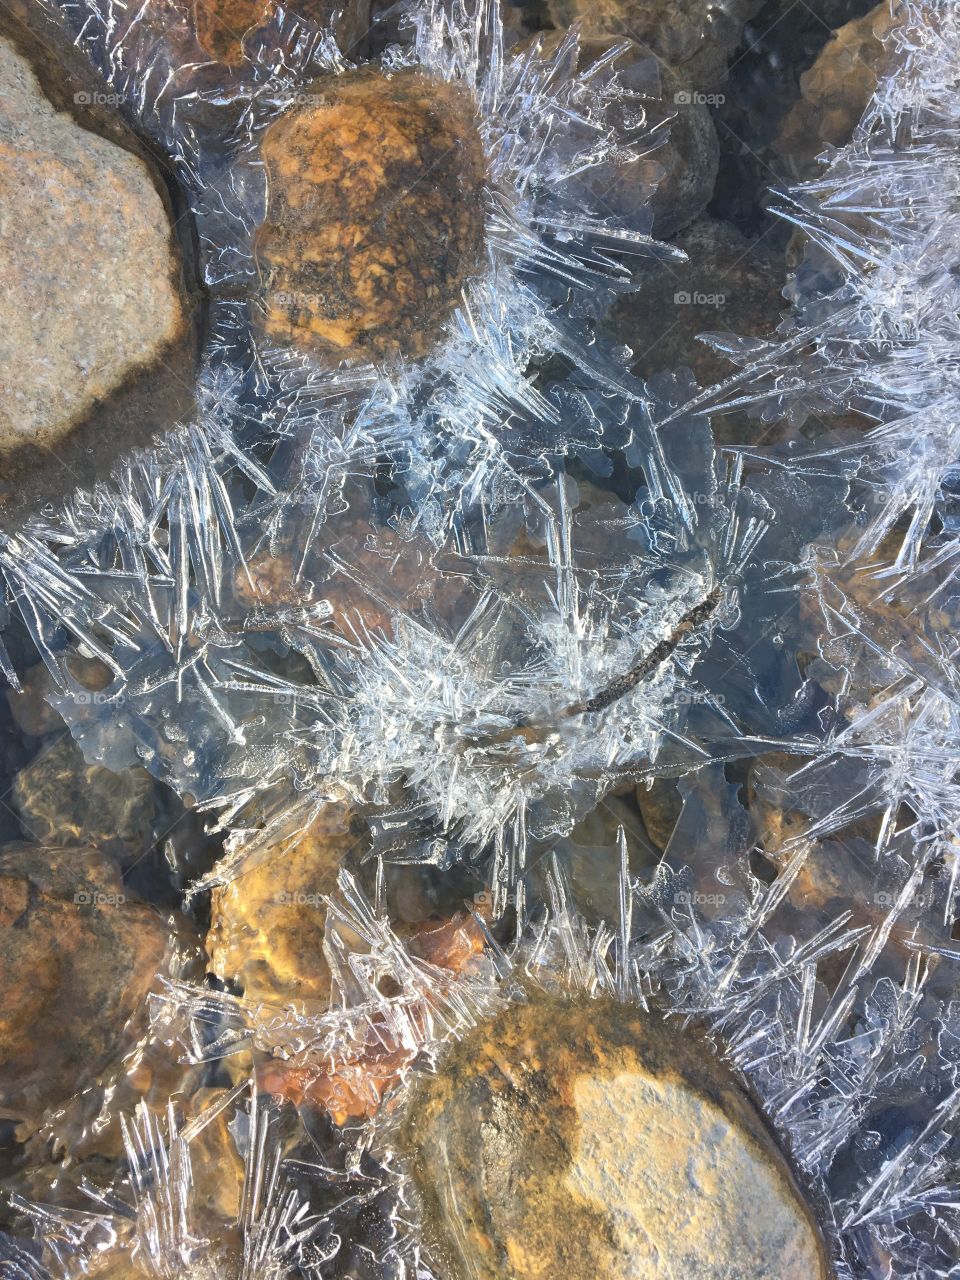 Icy morning walk along the river. 